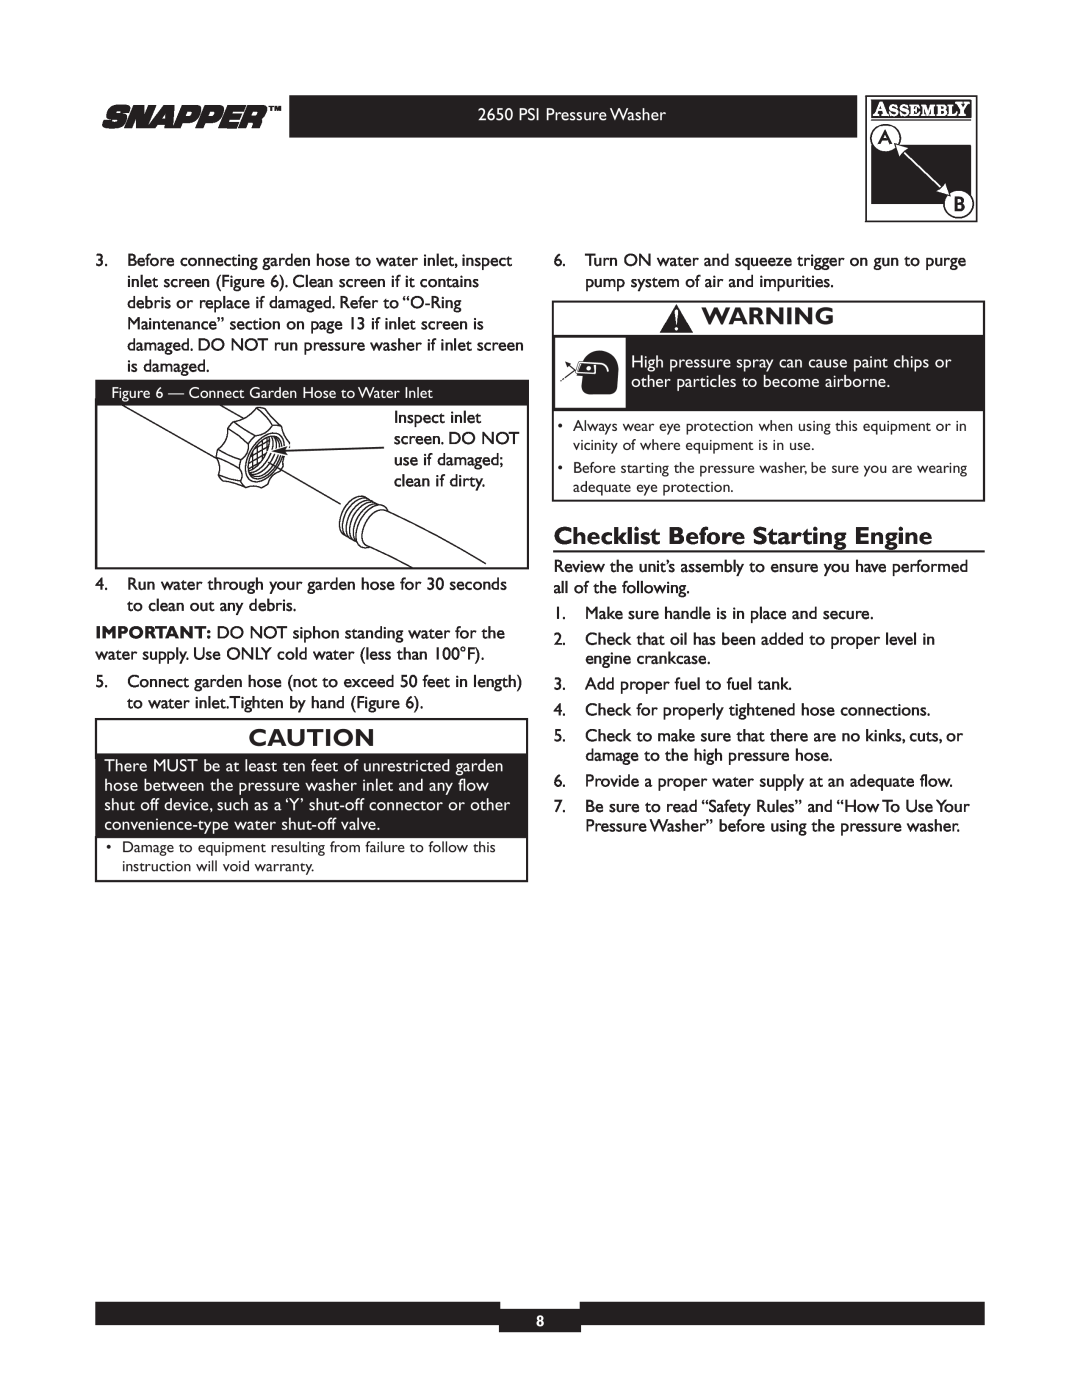 Snapper 020230 user manual Checklist Before Starting Engine 